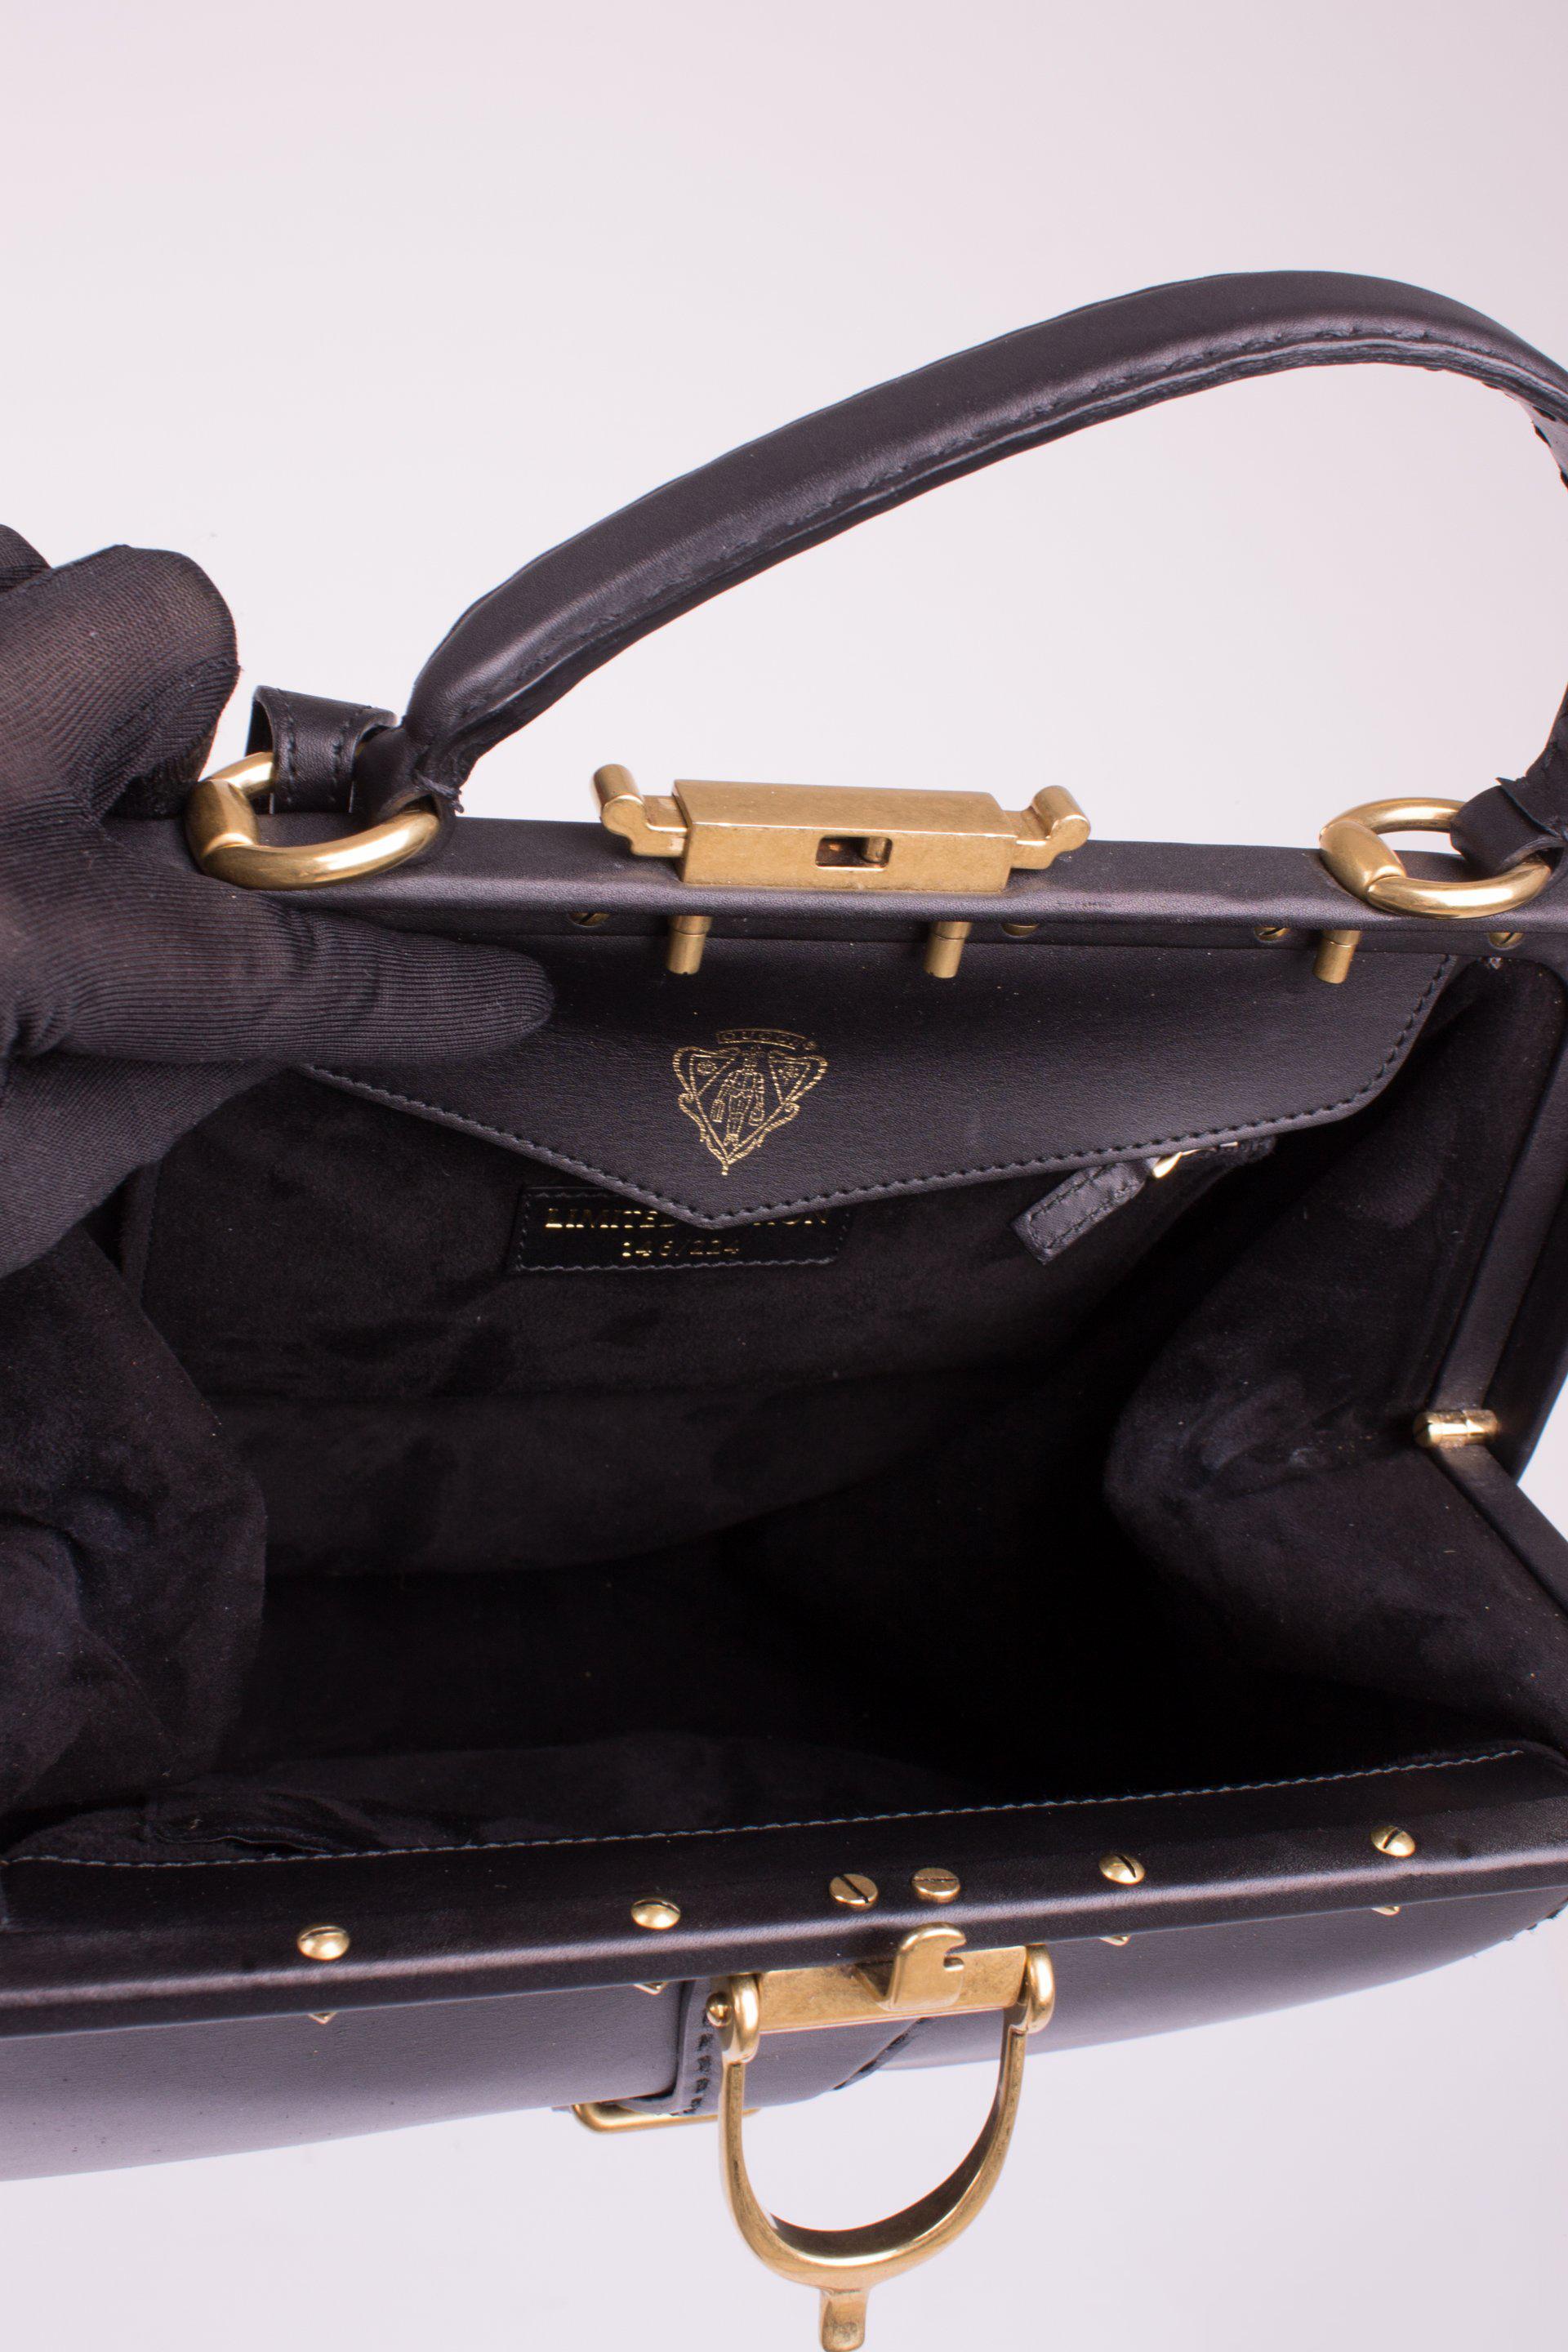 Gucci Lady Stirrup Top Handle Bag Limited Edition - black leather In New Condition For Sale In Baarn, NL